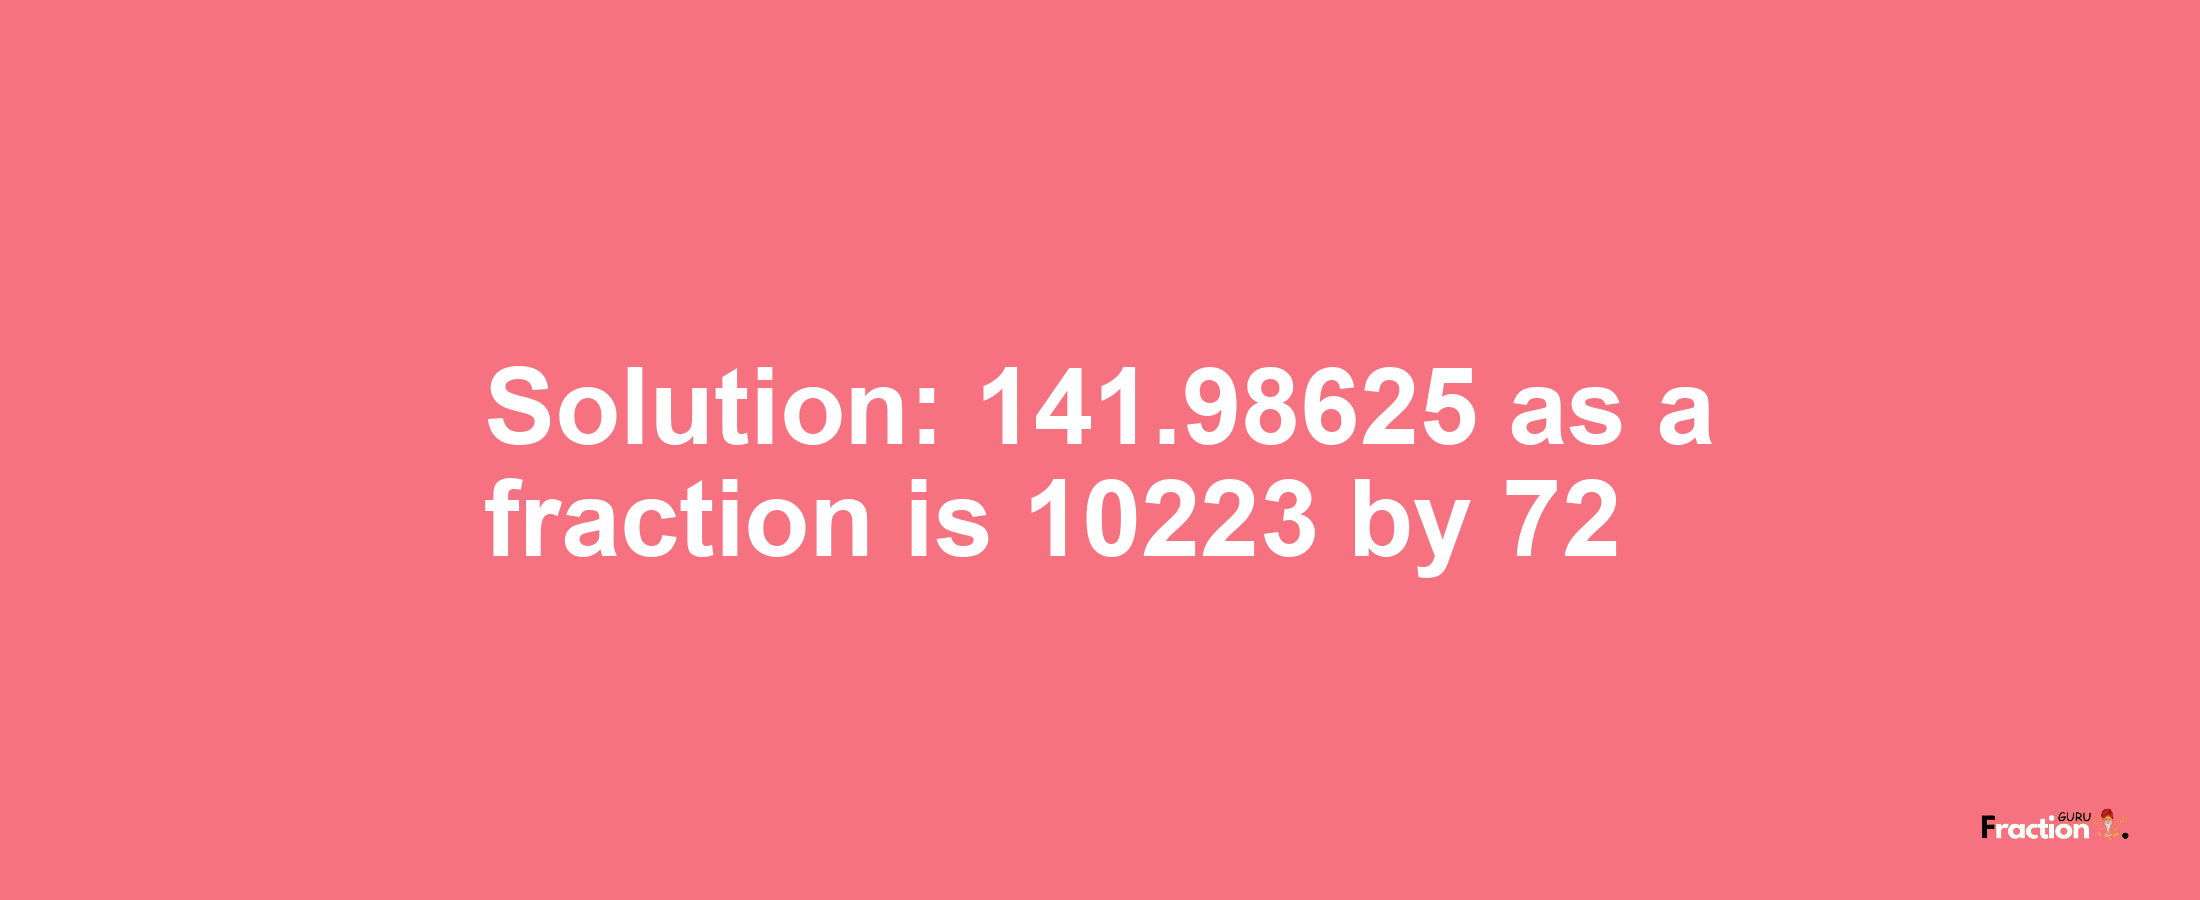 Solution:141.98625 as a fraction is 10223/72